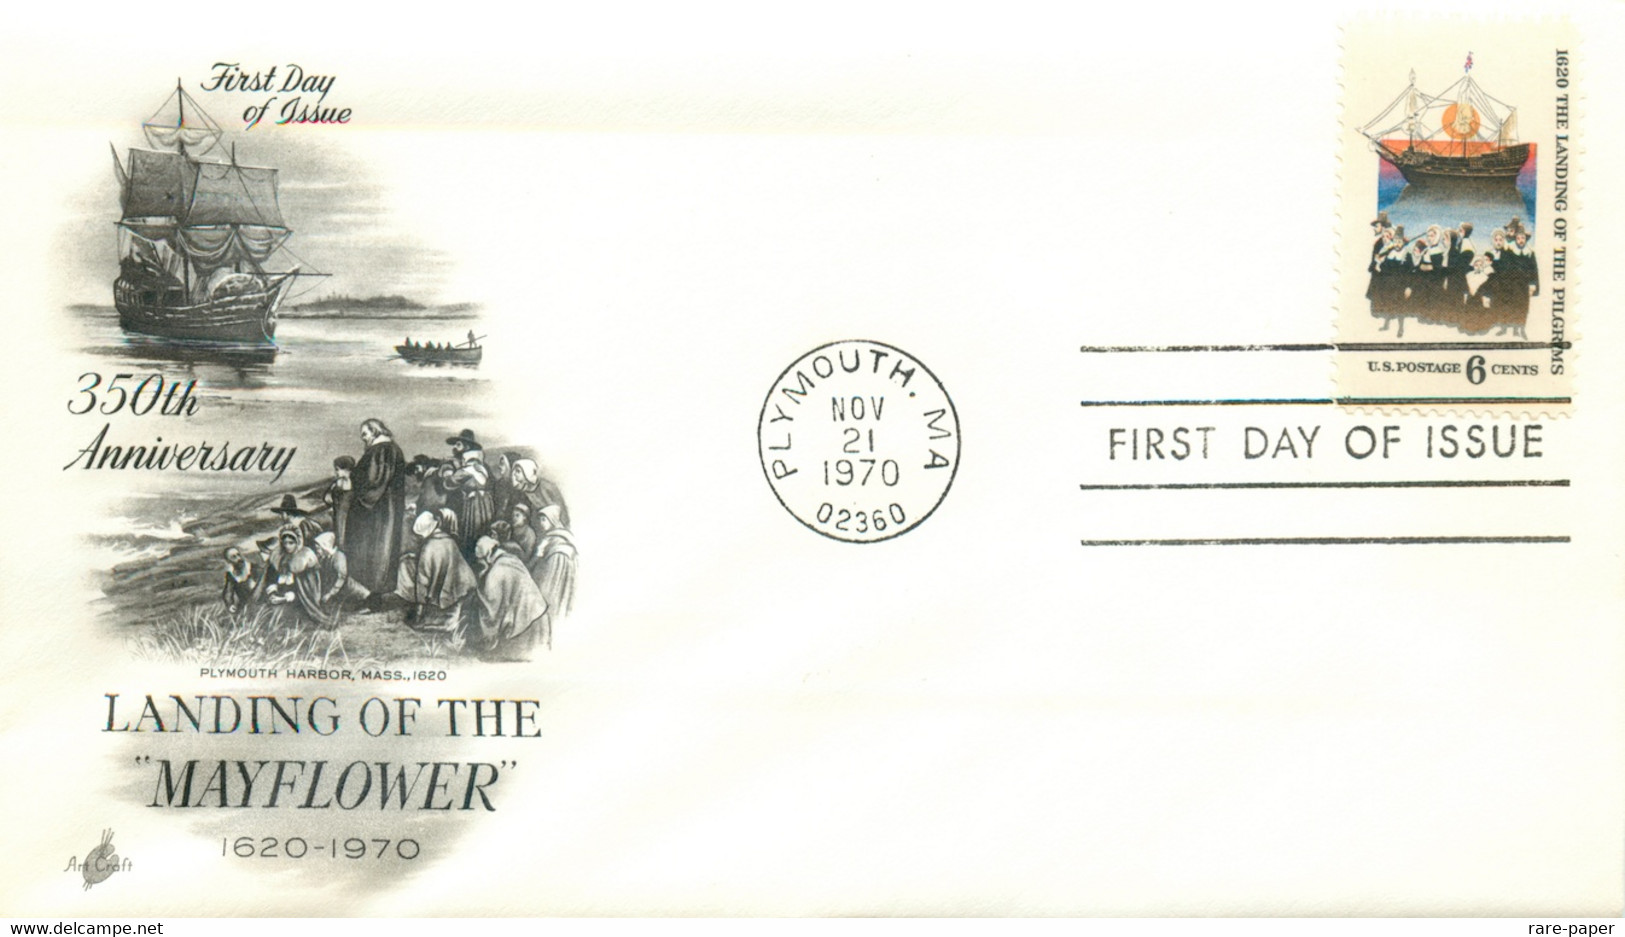 39 x First Day of Issue Covers 1969-1971, USA United States Envelopes